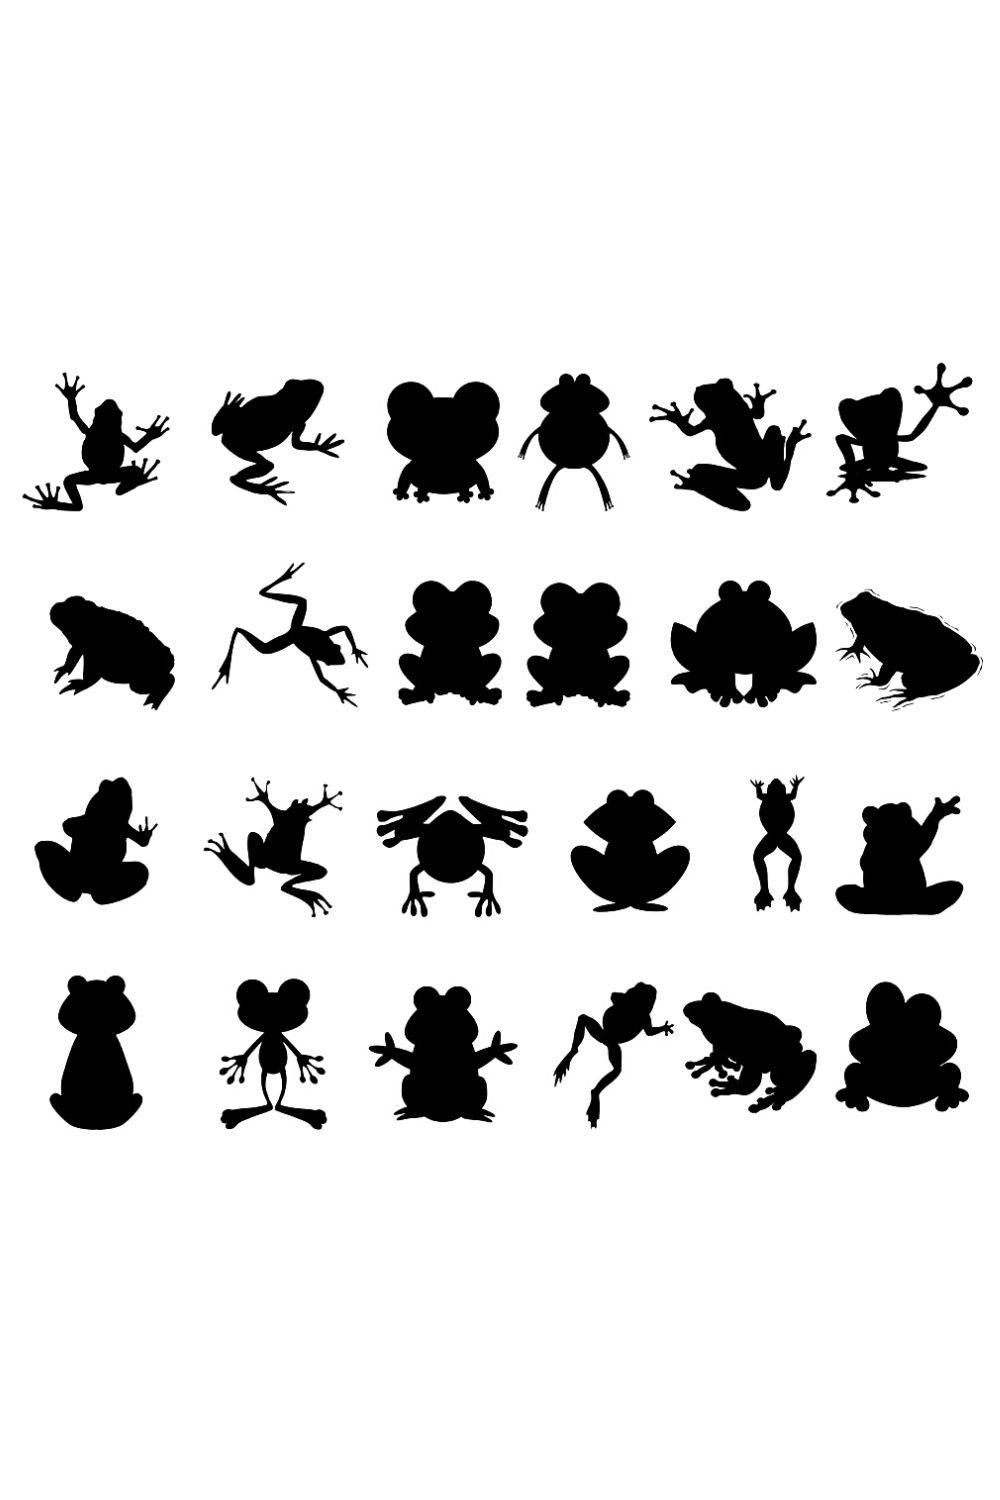 cute frog silhouette